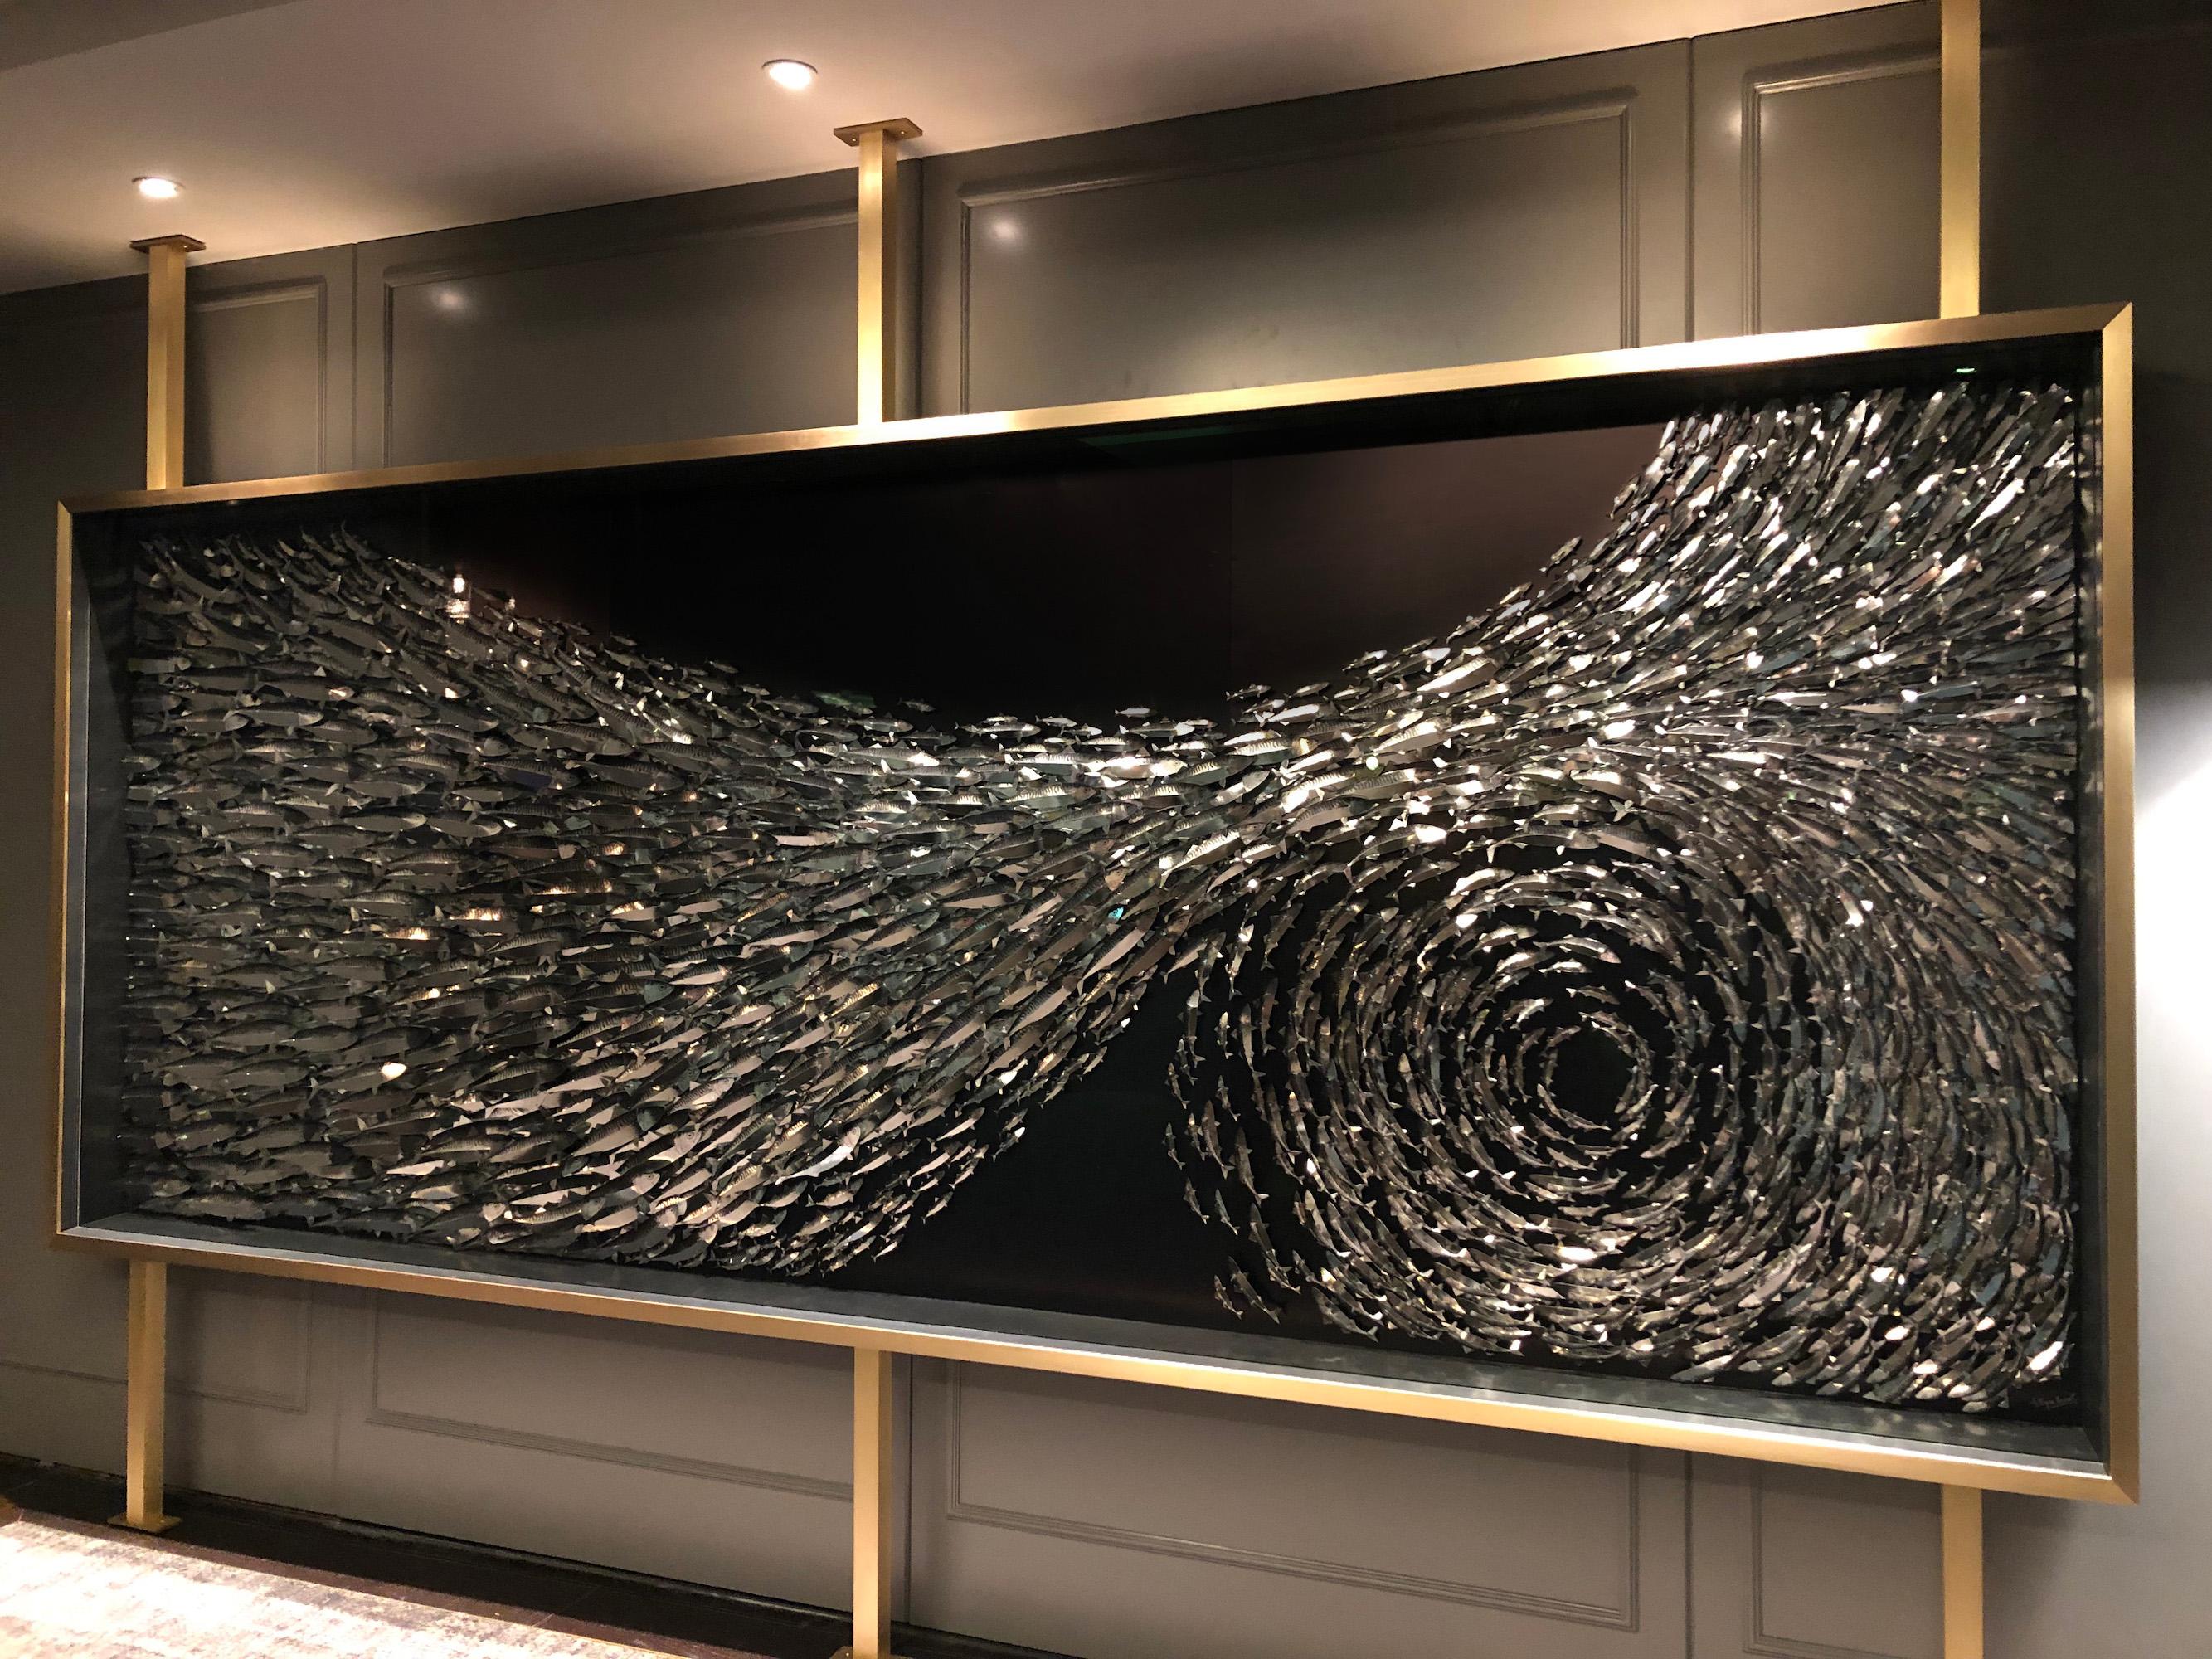 This unique and arresting piece captures the rush of energy and movement as a shoal of 1,000 mackerel switches direction, their silver bellies flashing in the sunlight. Each fish is fabricated by hand in robust paper-based materials with a metallic